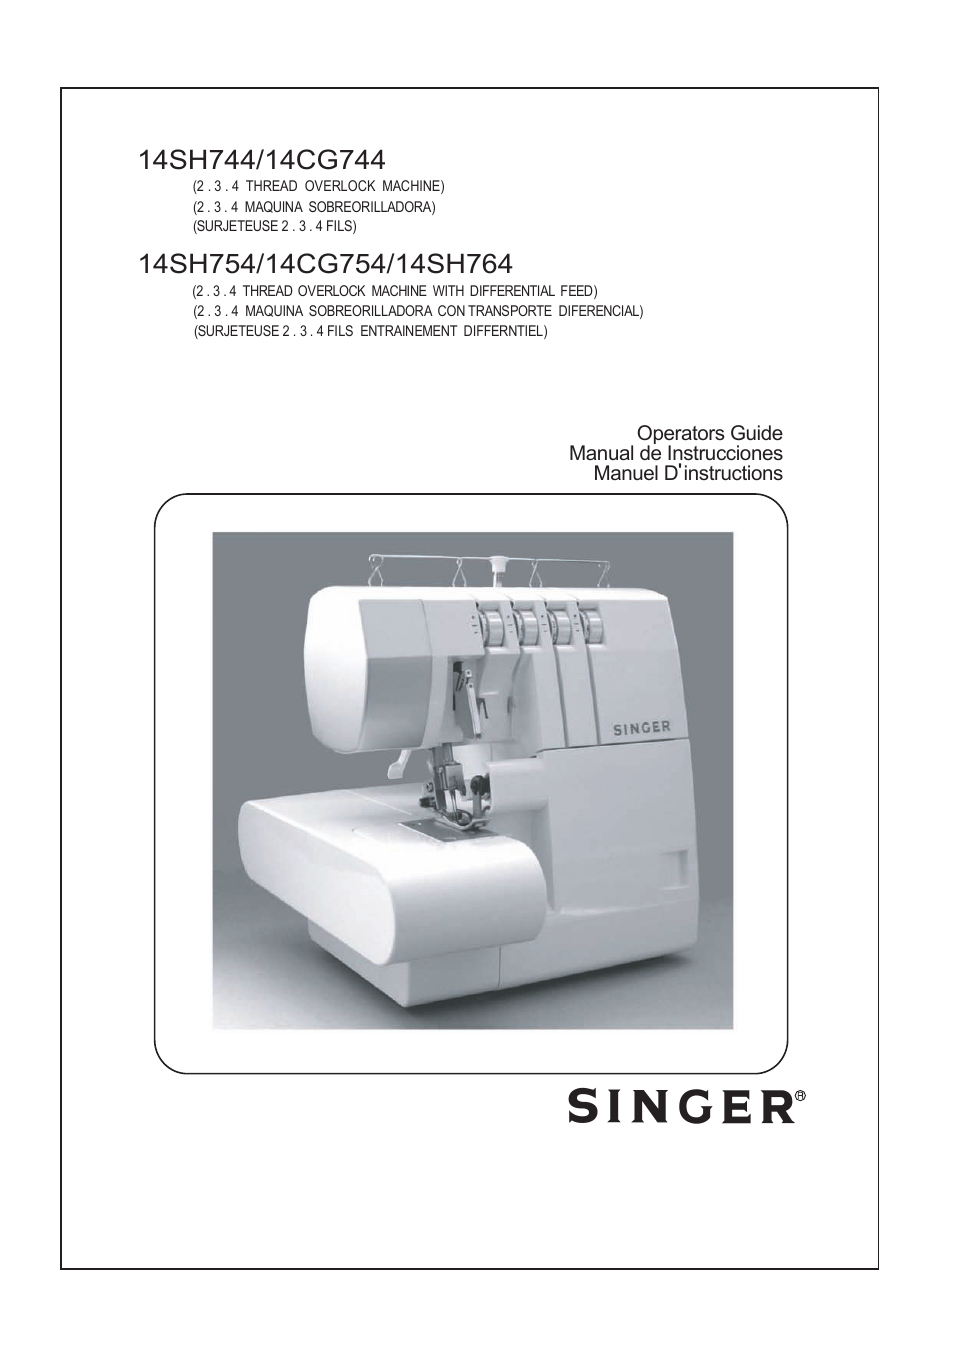 SINGER 14SH764 Stylist Serger User Manual | 156 pages